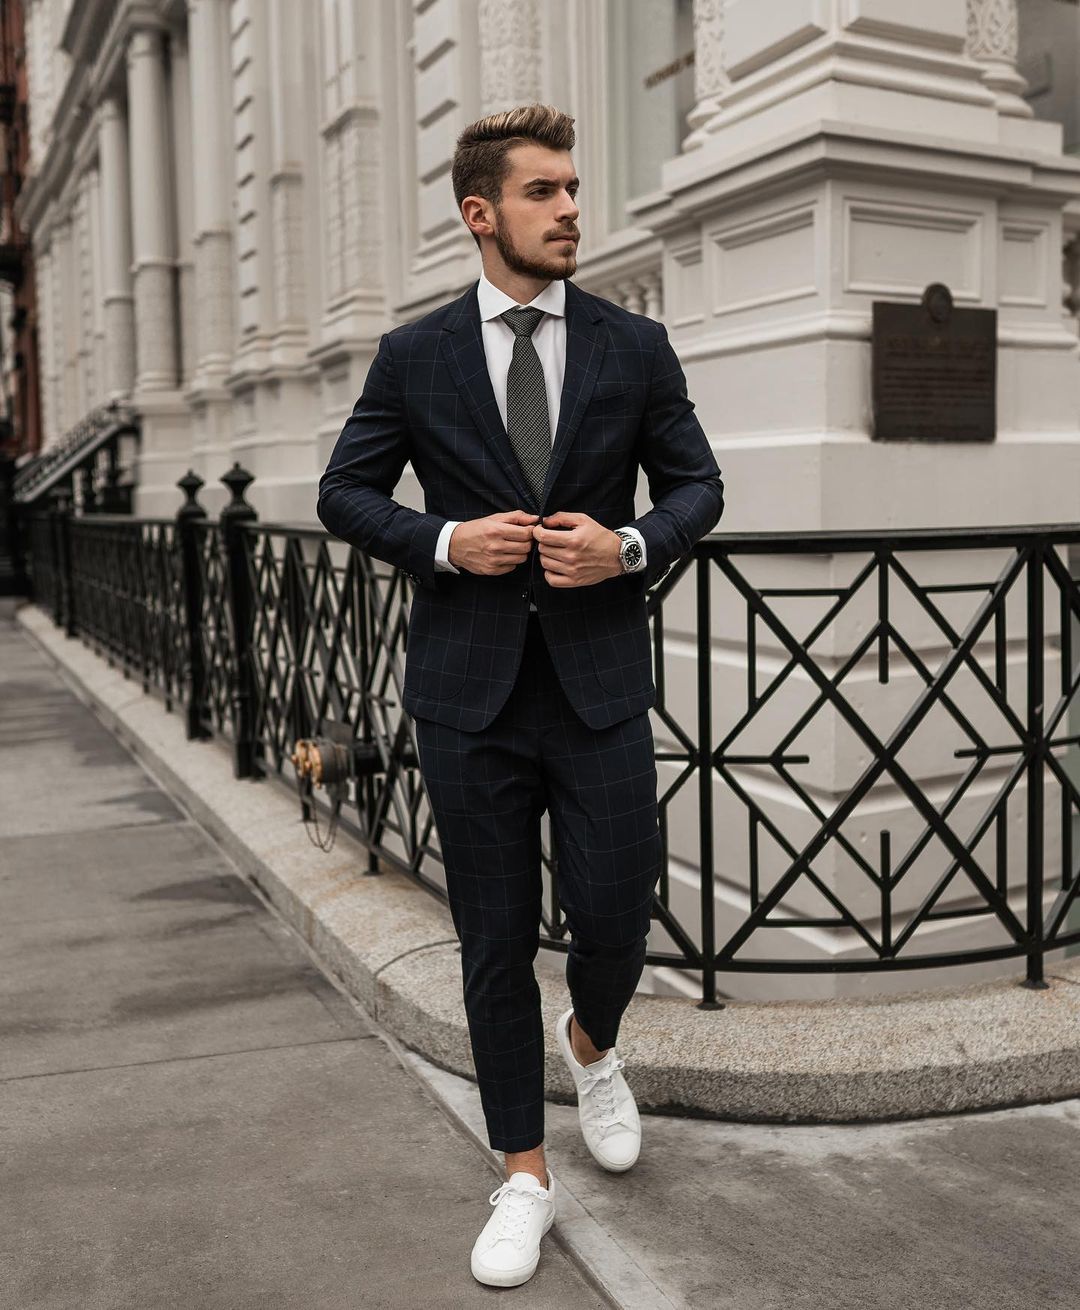 Men's Blue Suit, White Crew-neck T-shirt, White Leather High Top Sneakers